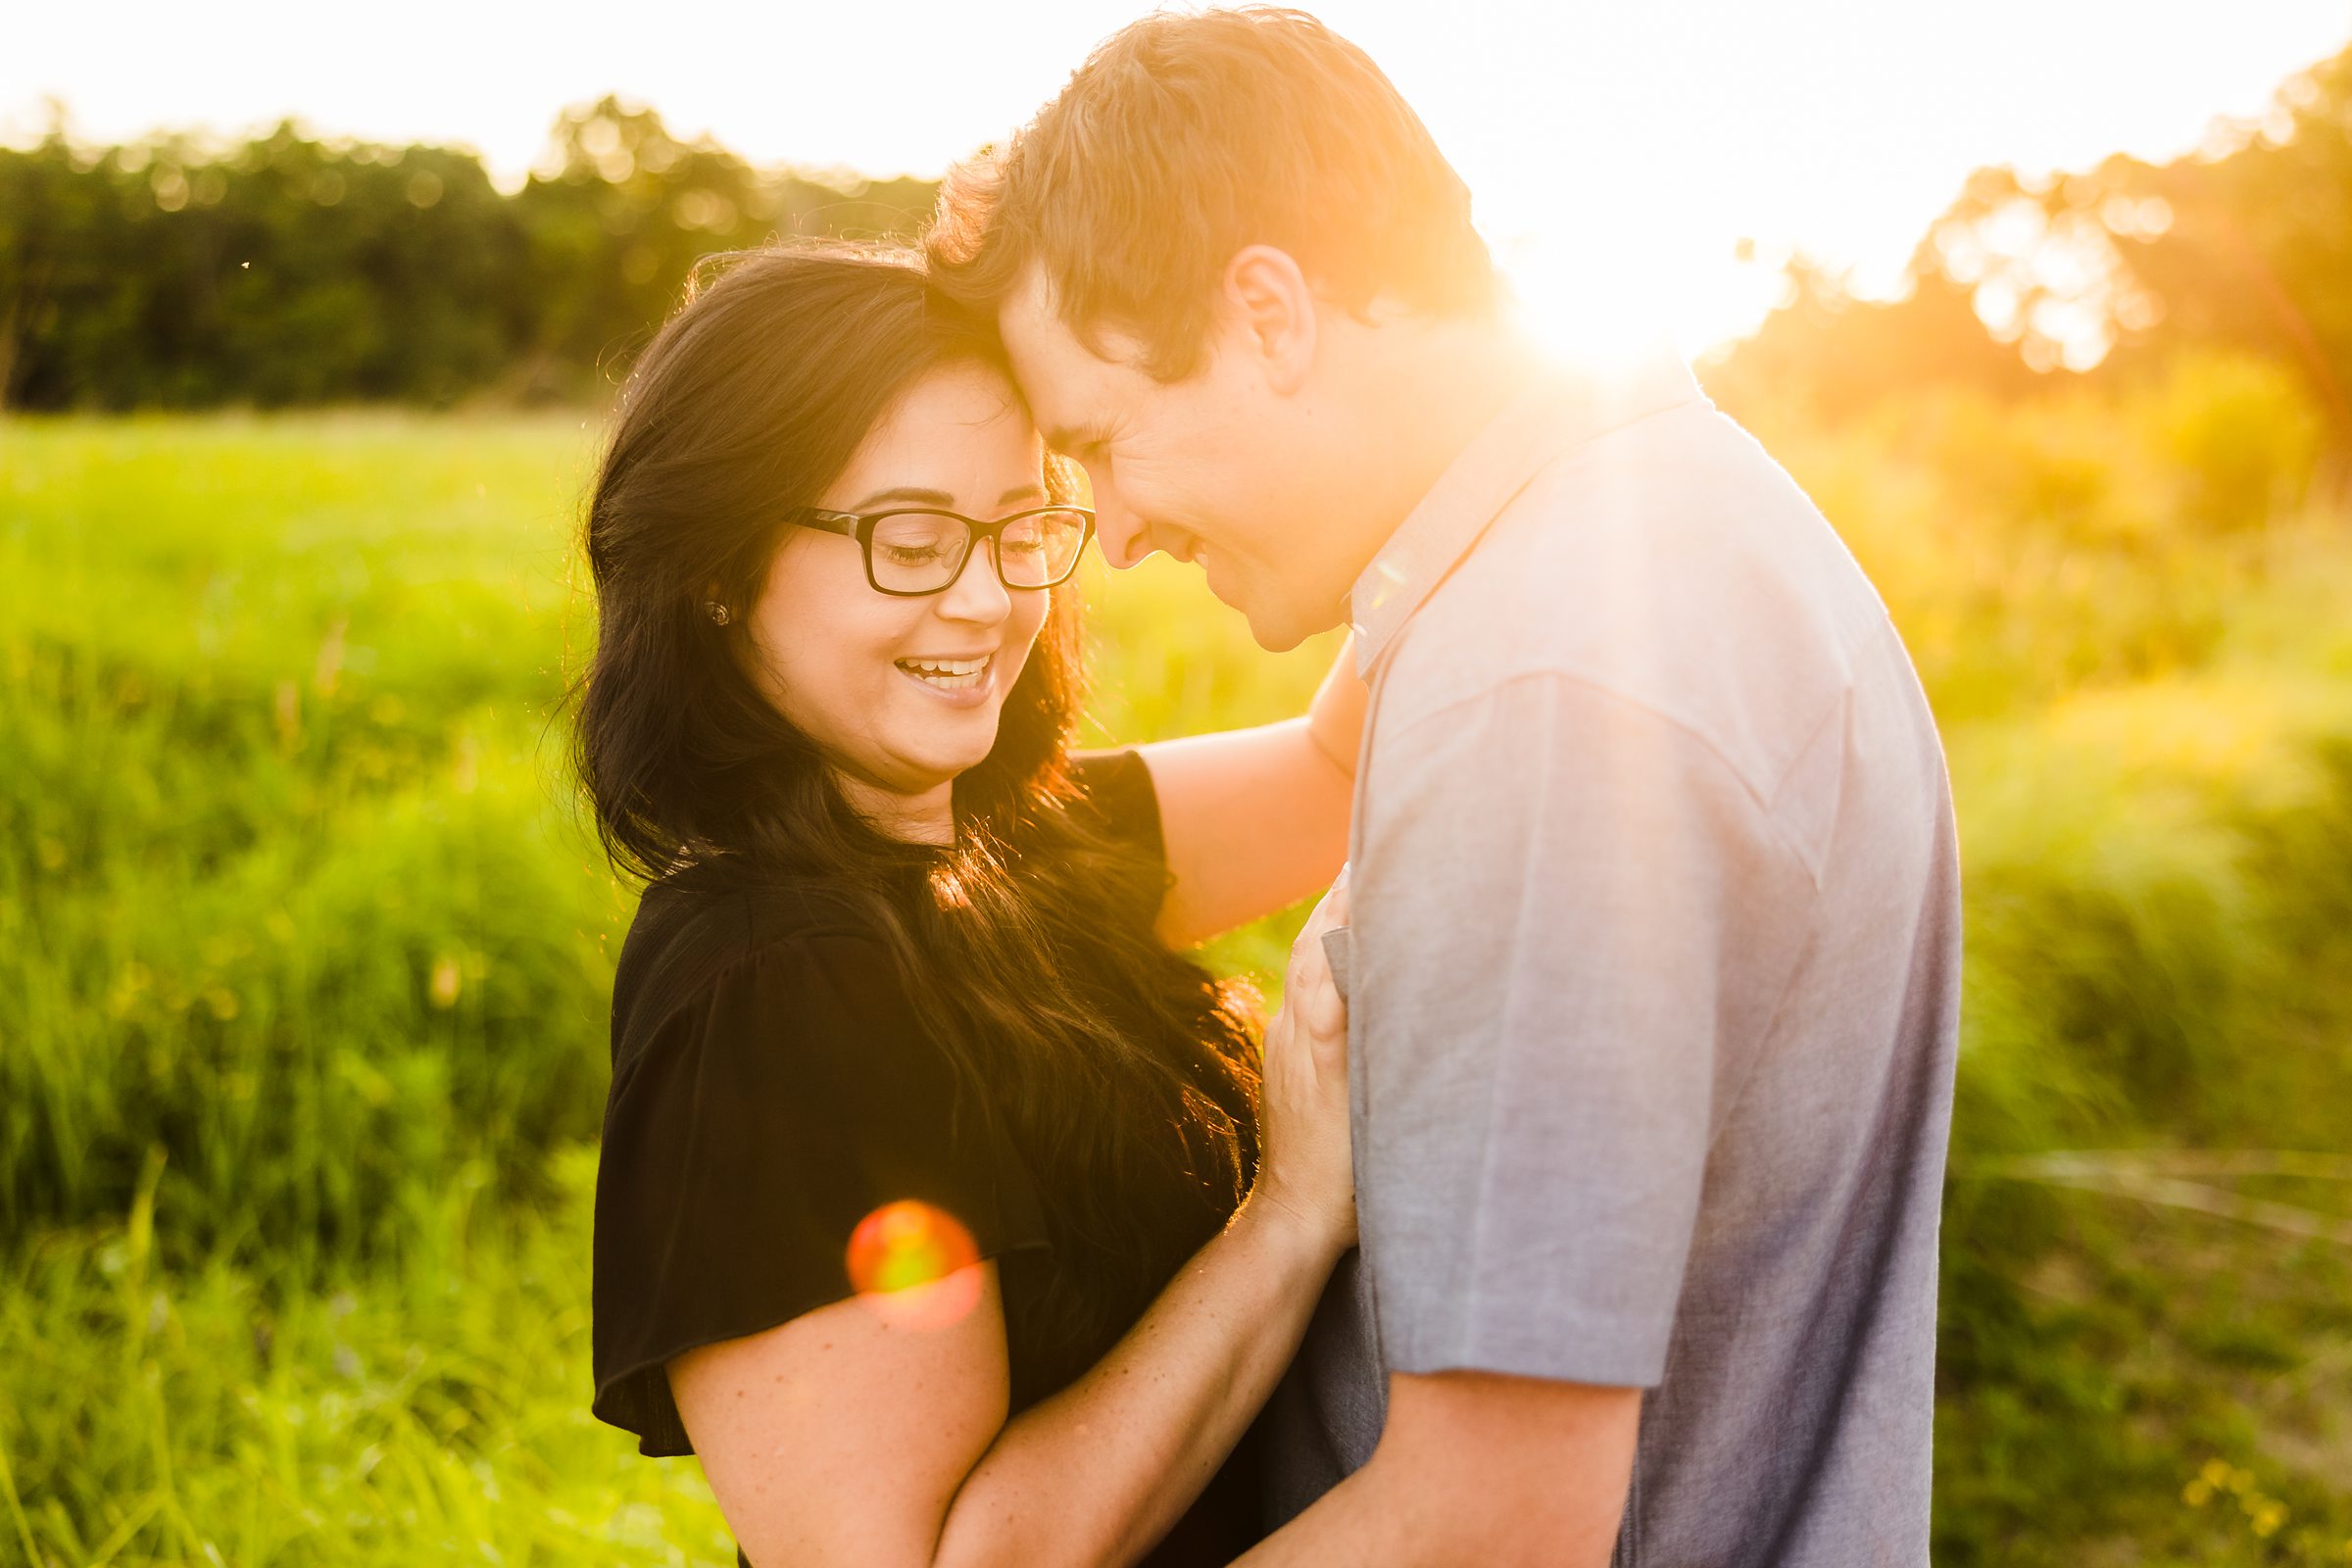 Couple embrace during their engagement session at the Chain O Lakes State Park in Fox Lake, Illinois.